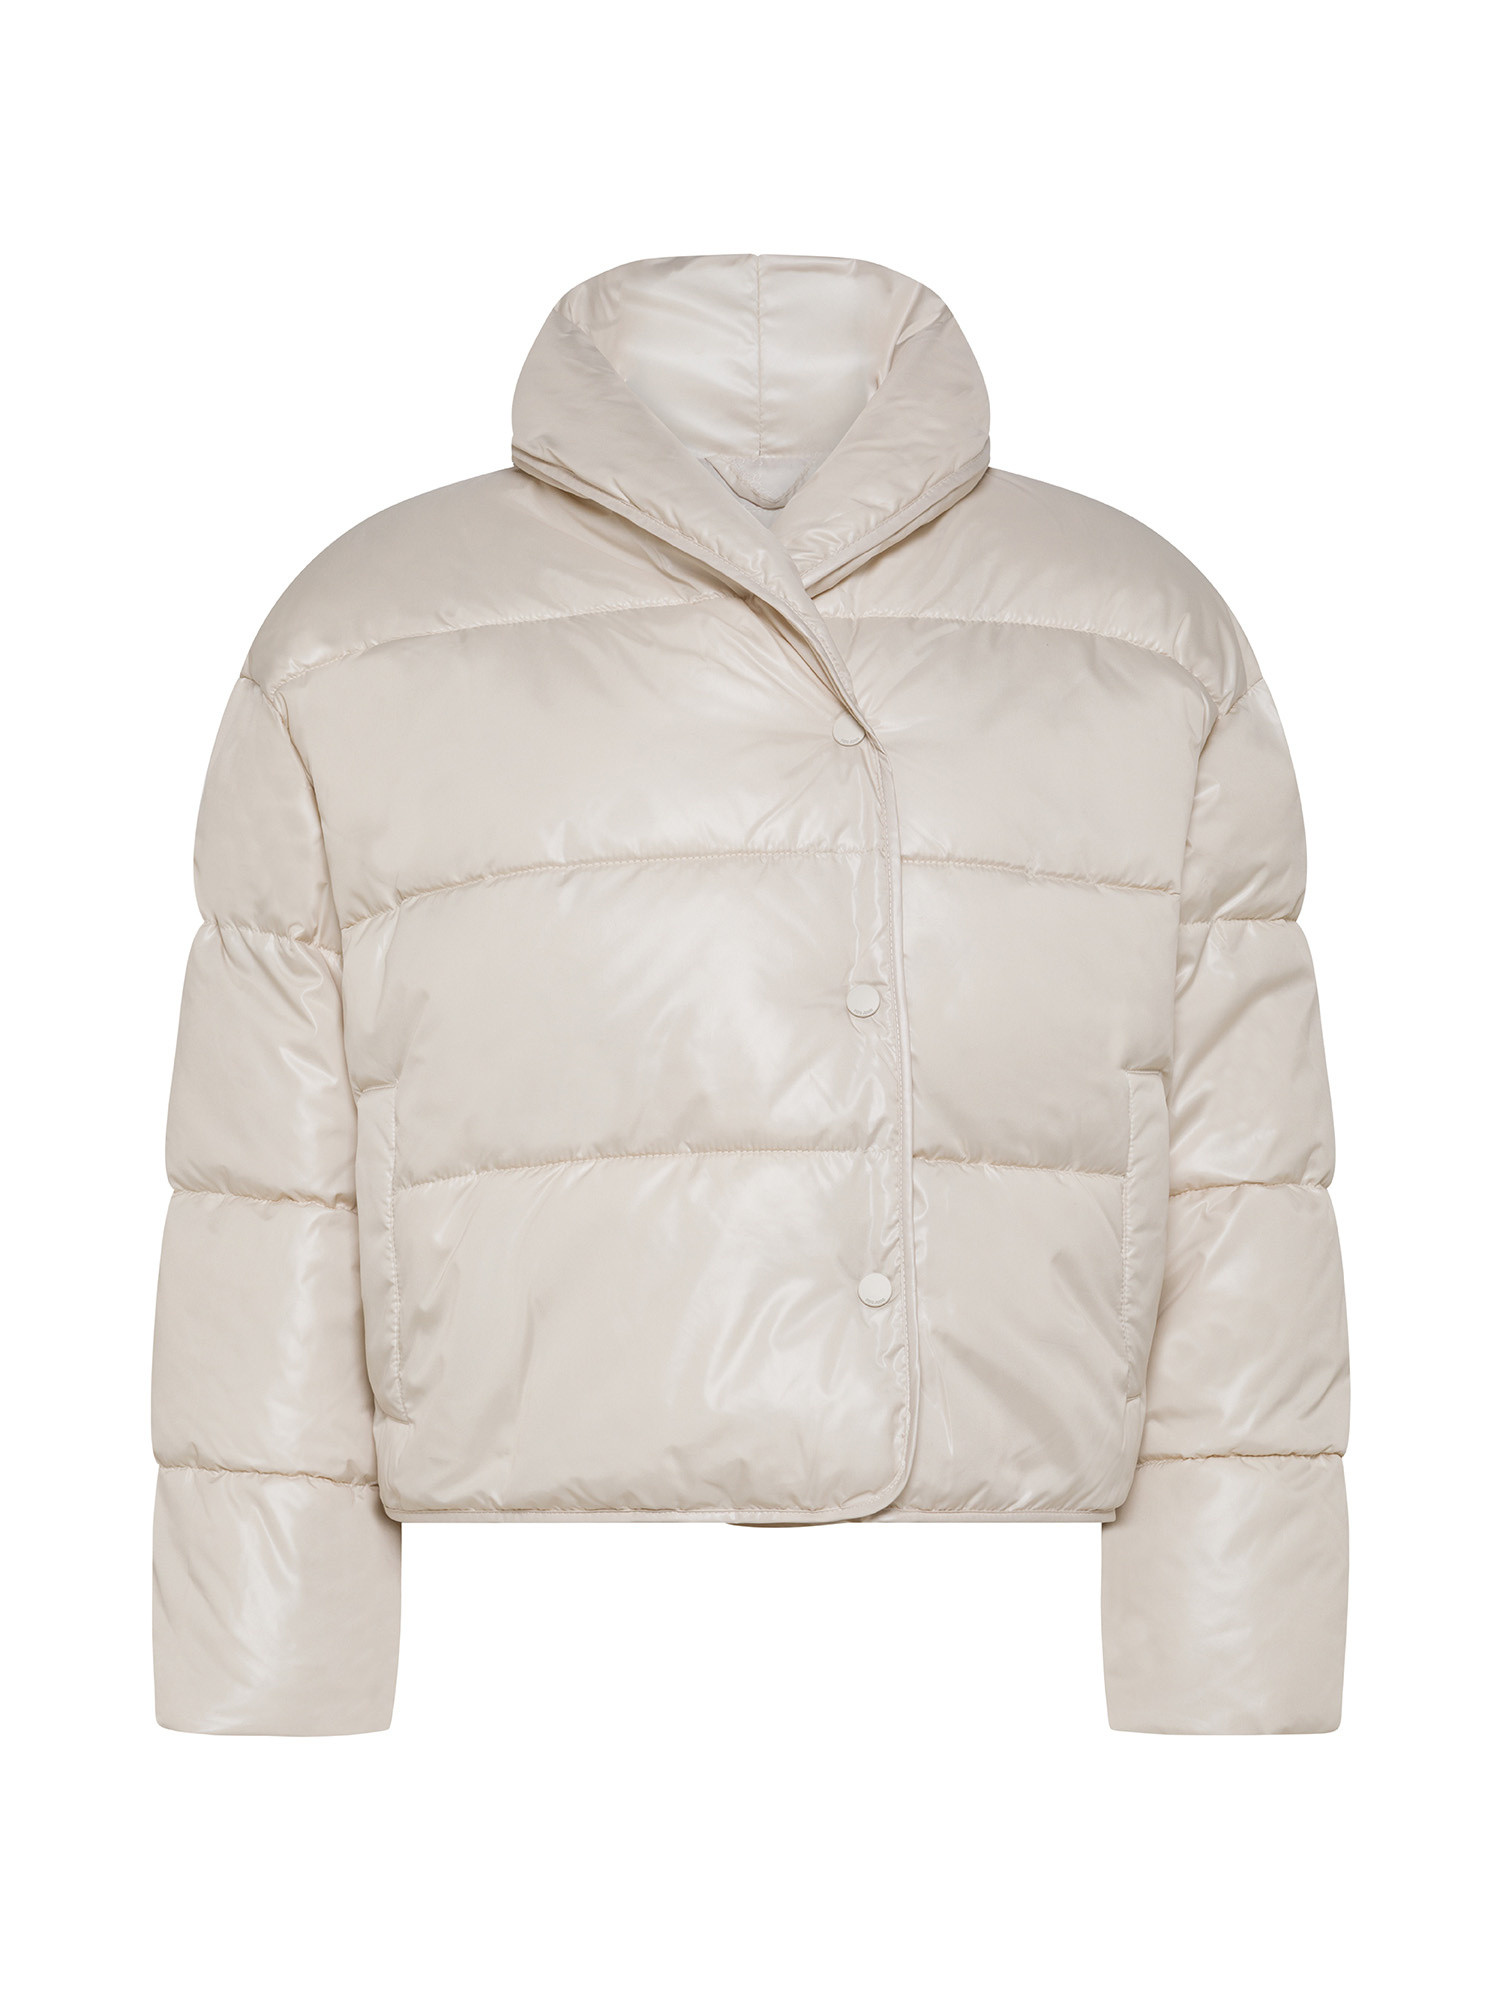 Pepe Jeans - Cropped down jacket in shiny fabric, Cream, large image number 0